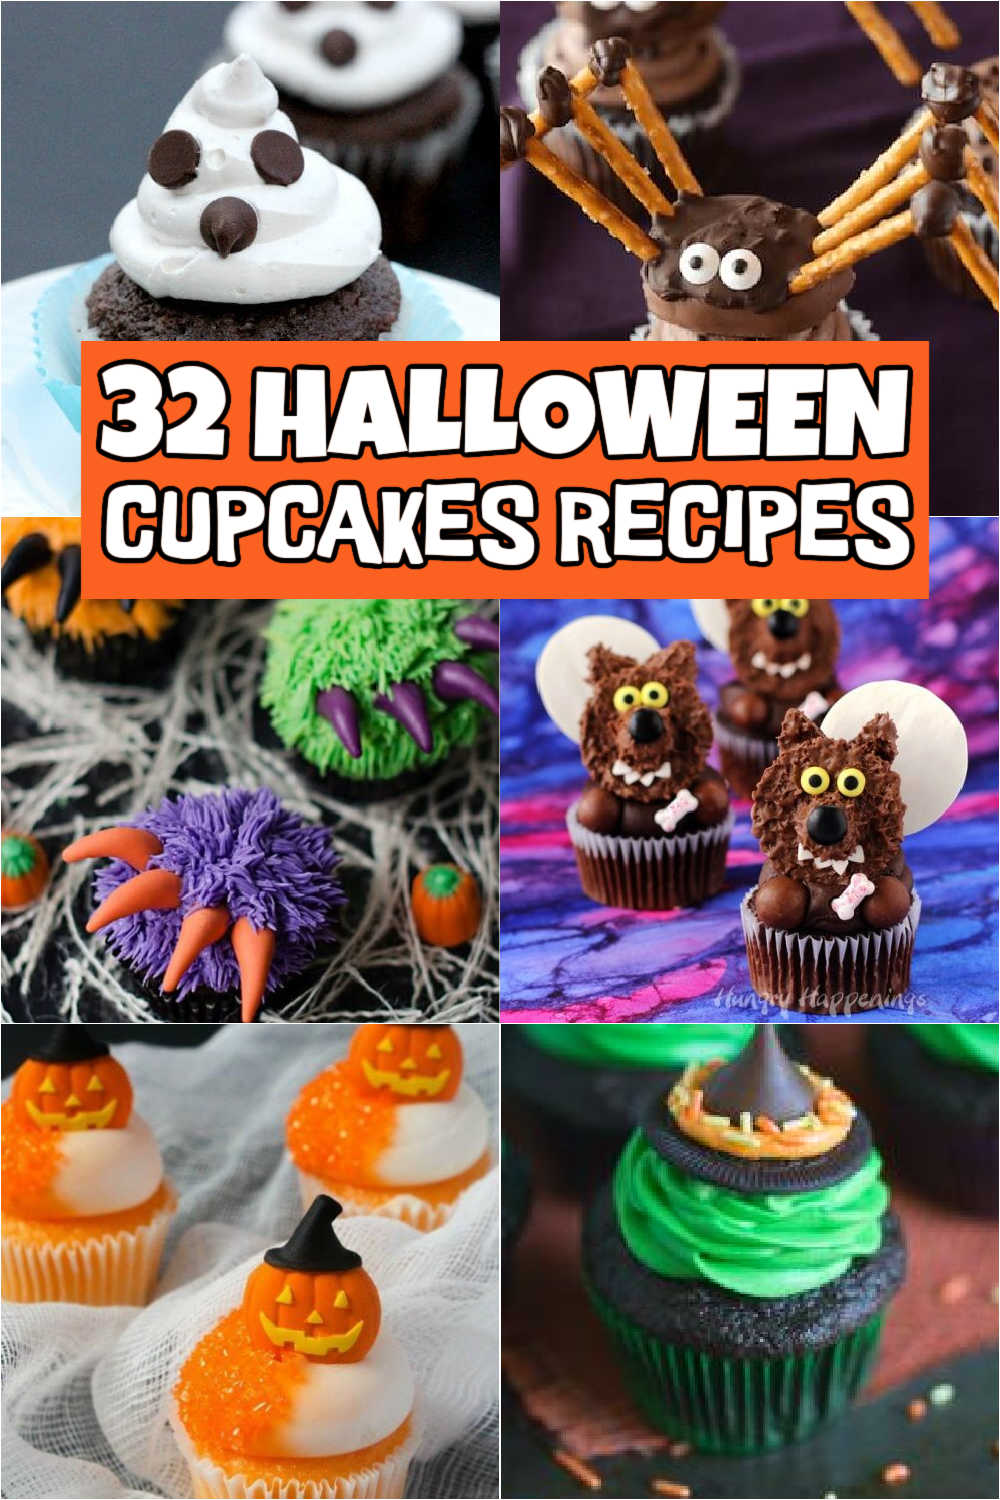 Try these fun and easy Halloween cupcakes ideas that kids are going to love. 25 Halloween cupcake ideas that don't cost a fortune to make. Grab some piping bags and icing and let's get creative with these easy Halloween cupcake ideas. #eatingonadime #halloweencupcakerecipes #cupcakerecipes